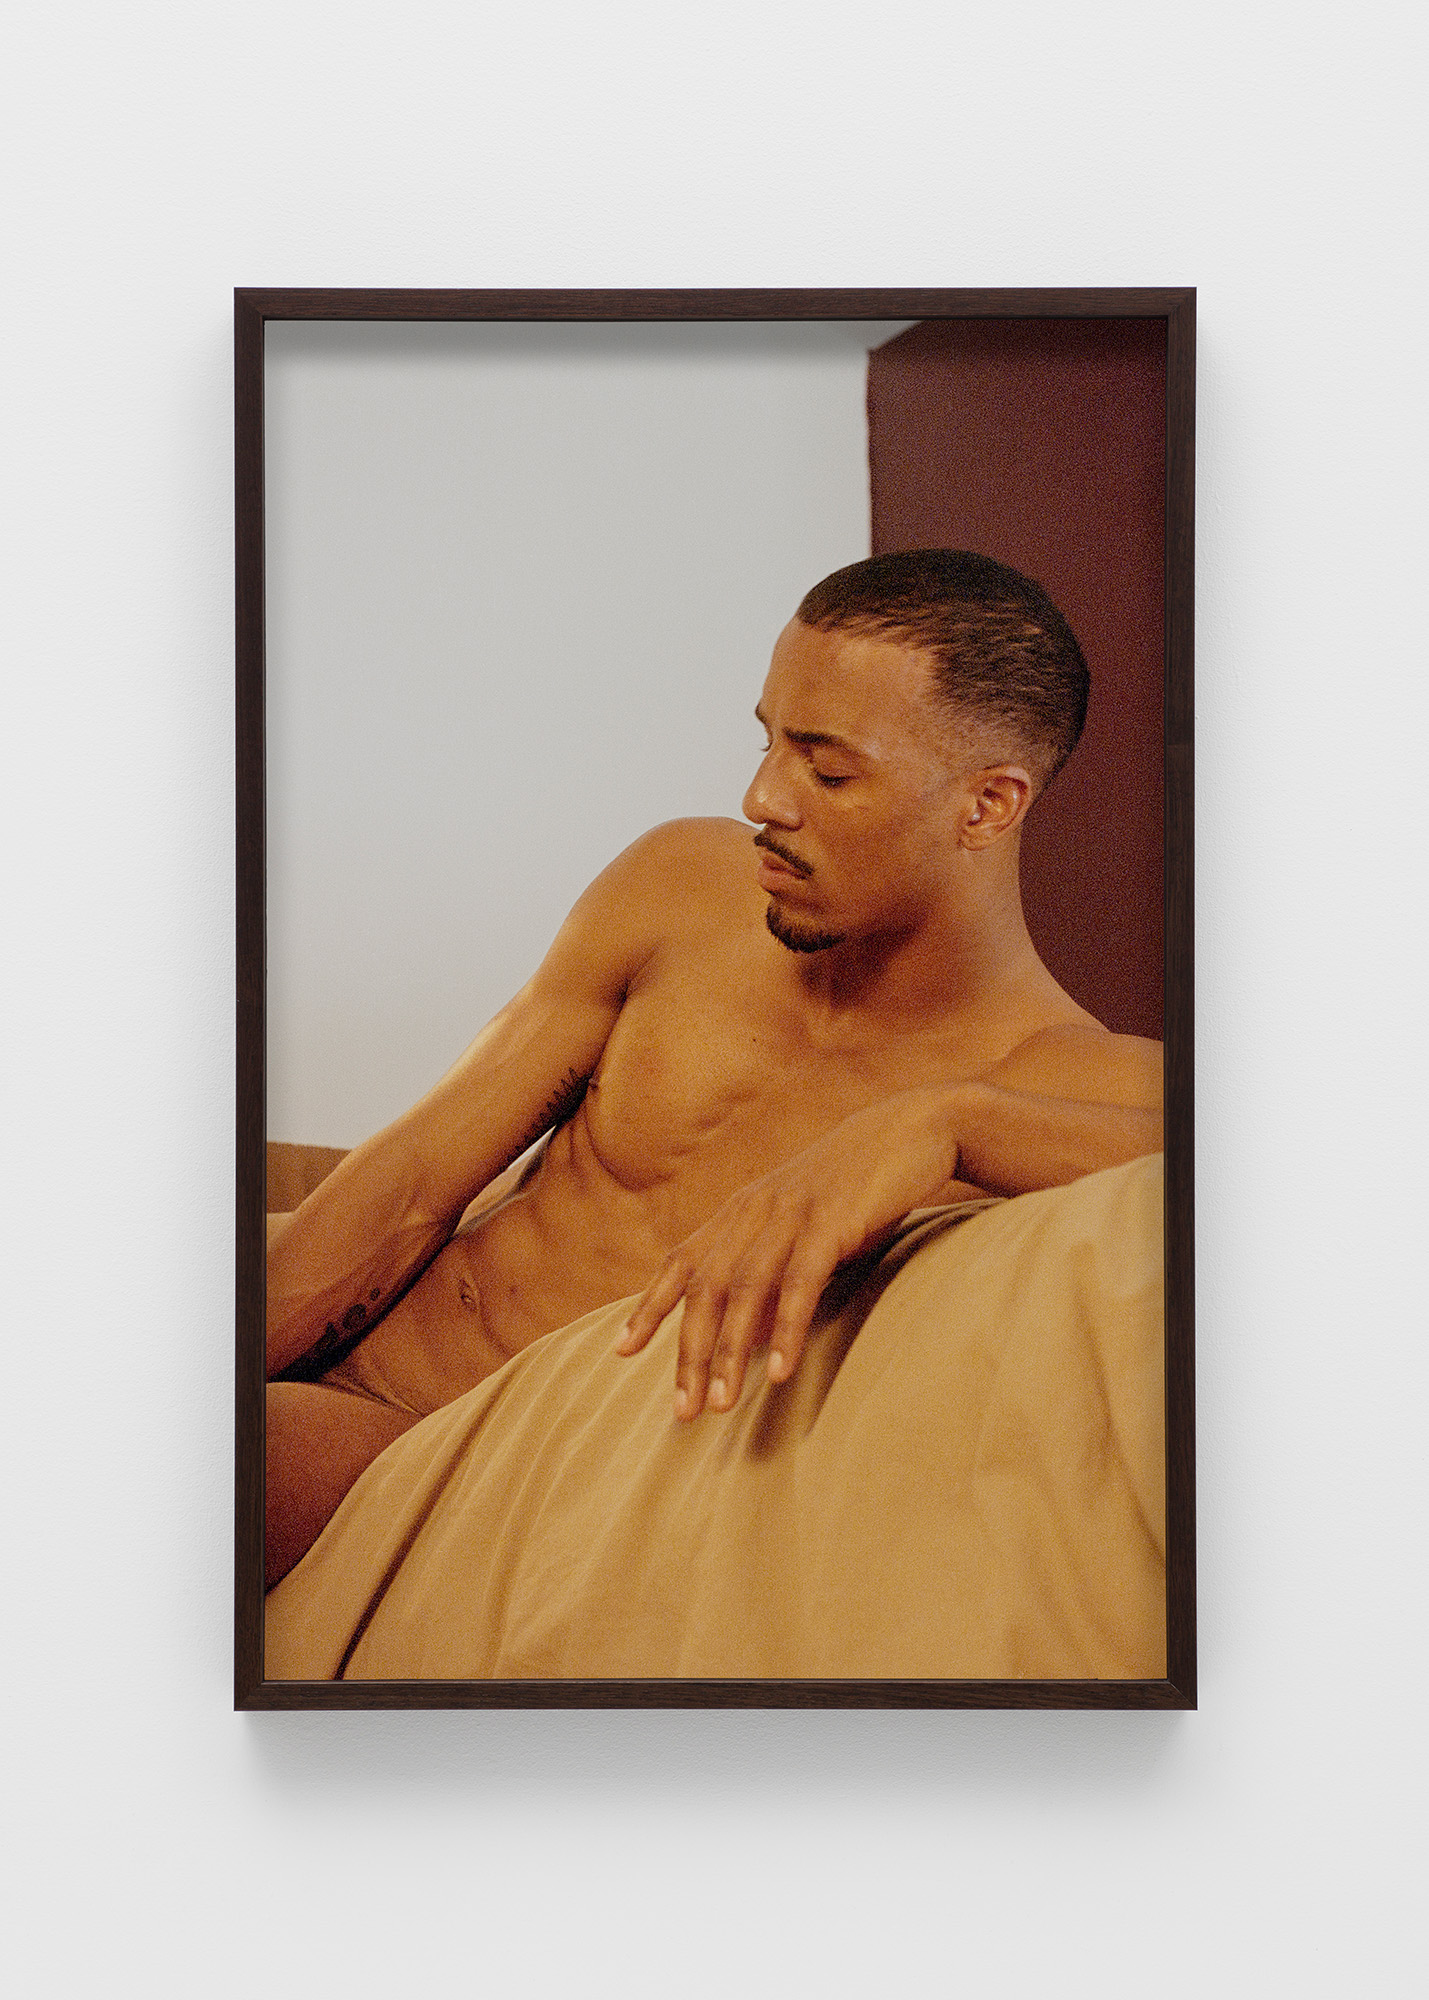 Meet Clifford Prince King, the photographer behind Queer PHOTO: Orange Grove